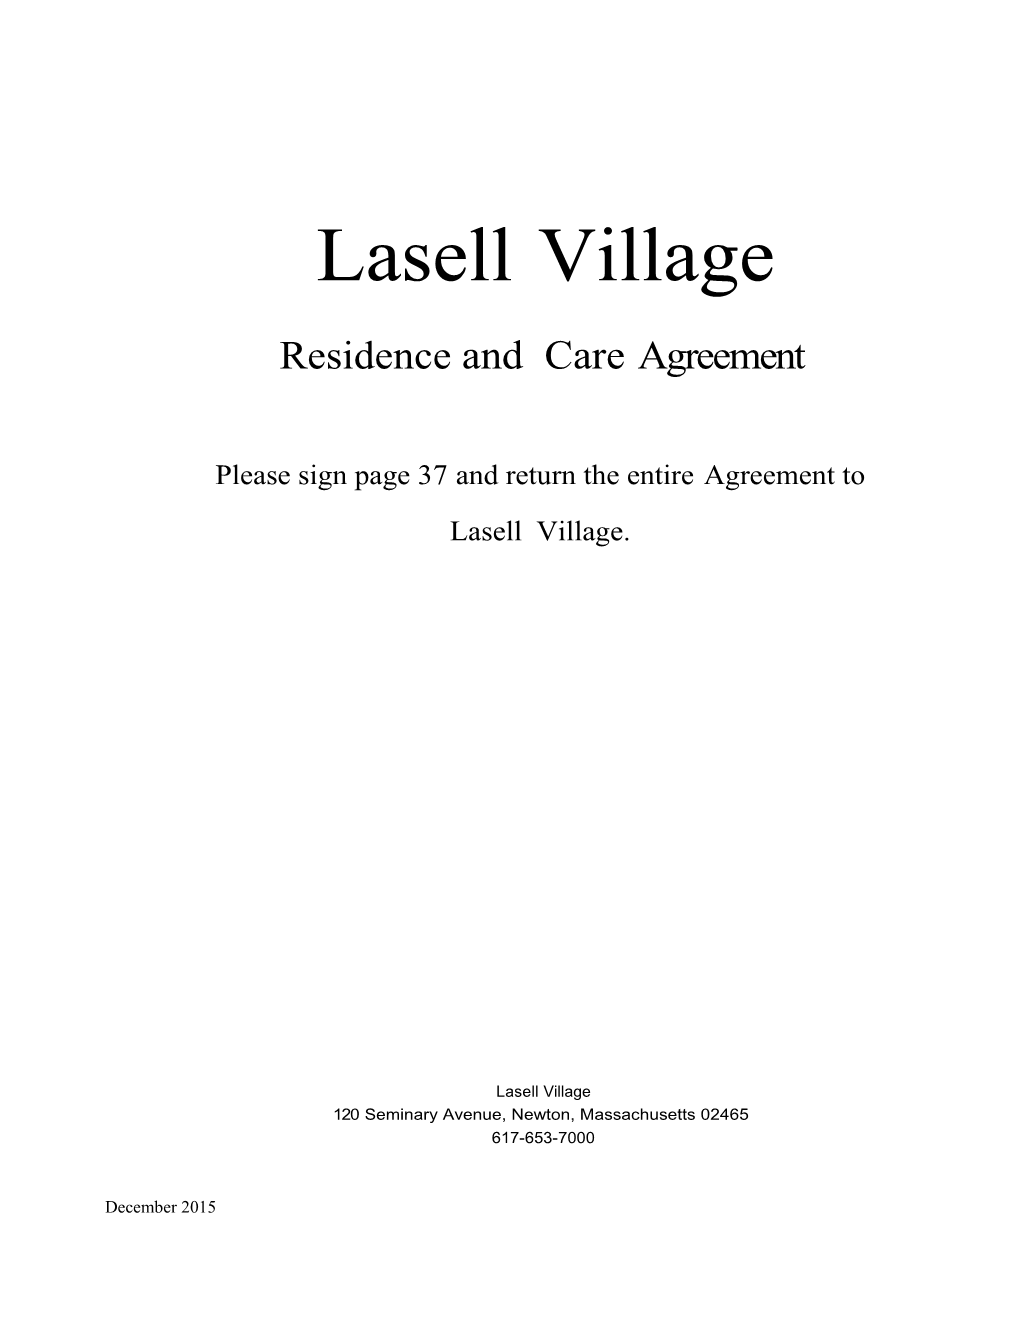 Please Sign Page 37 and Return the Entireagreementto Lasellvillage